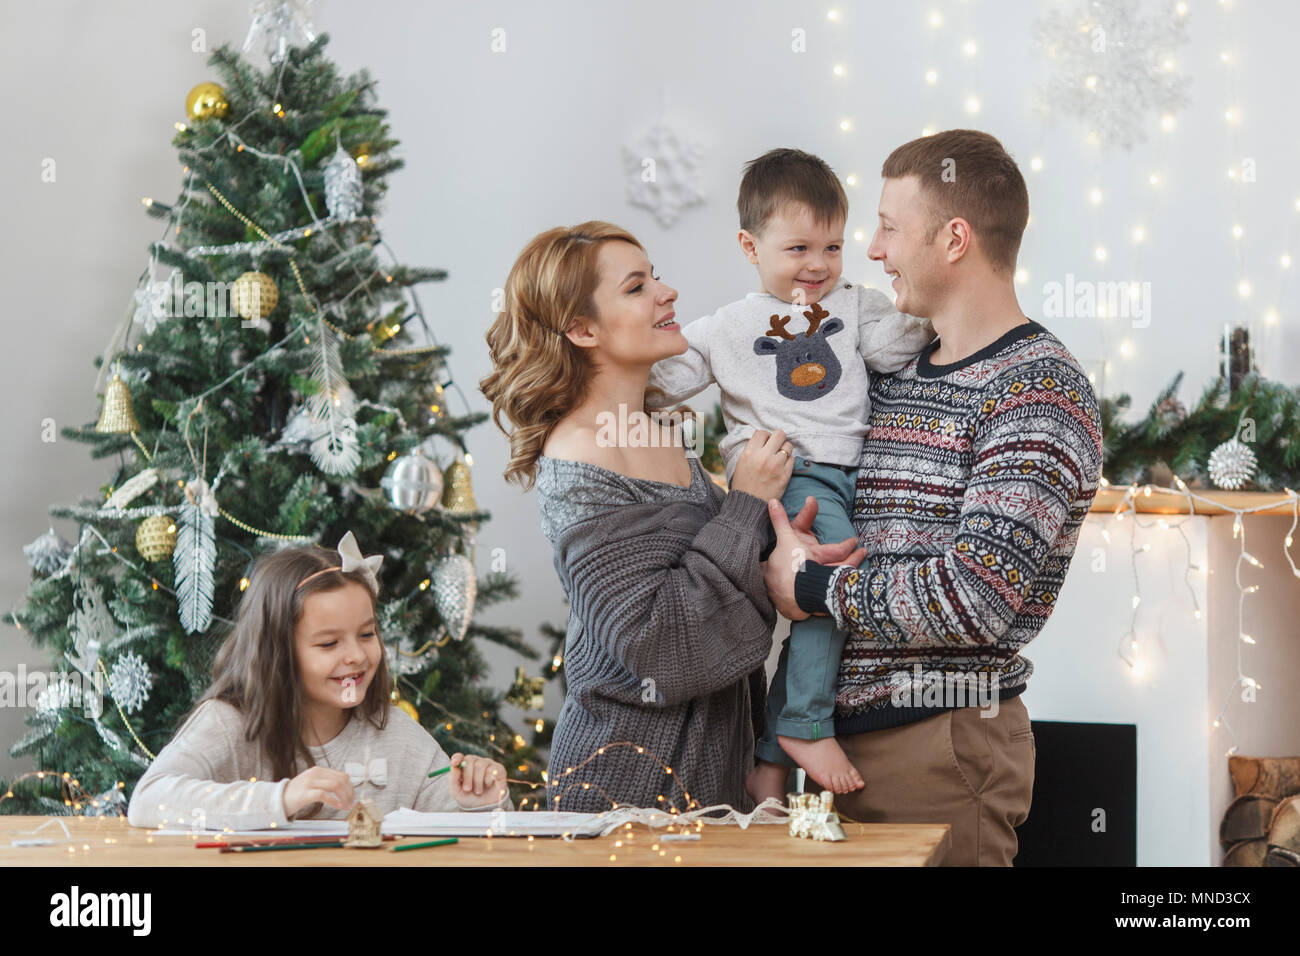 Father and mother holding son by daughter sitting at table against Christmas tree Stock Photo